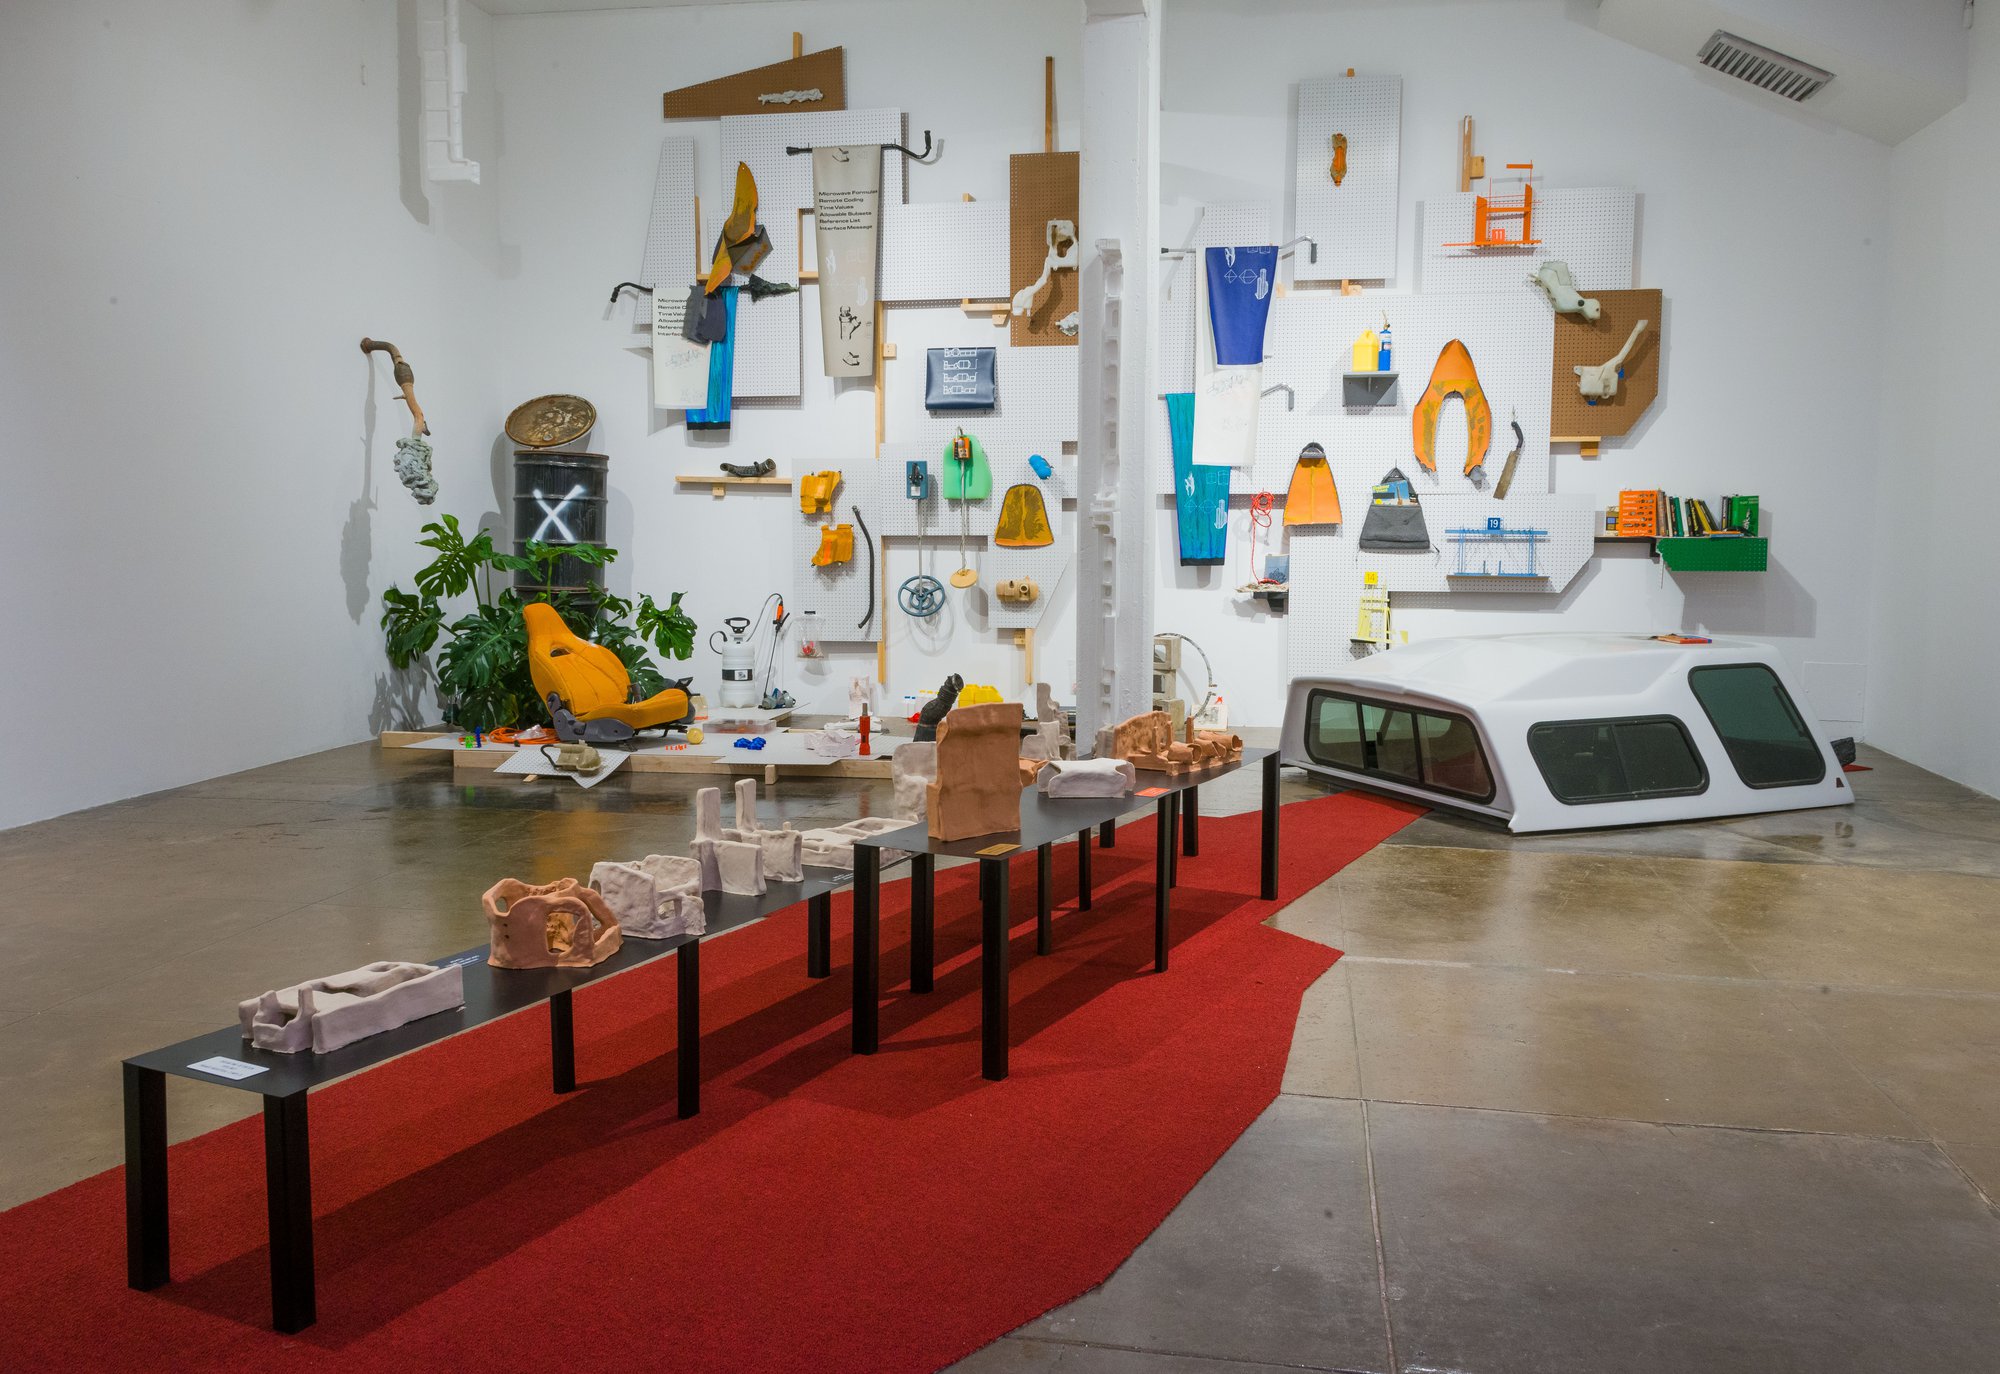 Emre Hüner,Installation view, a Model is not a Map a Home is not a House, Artpace, San Antonio, Texas, 2019